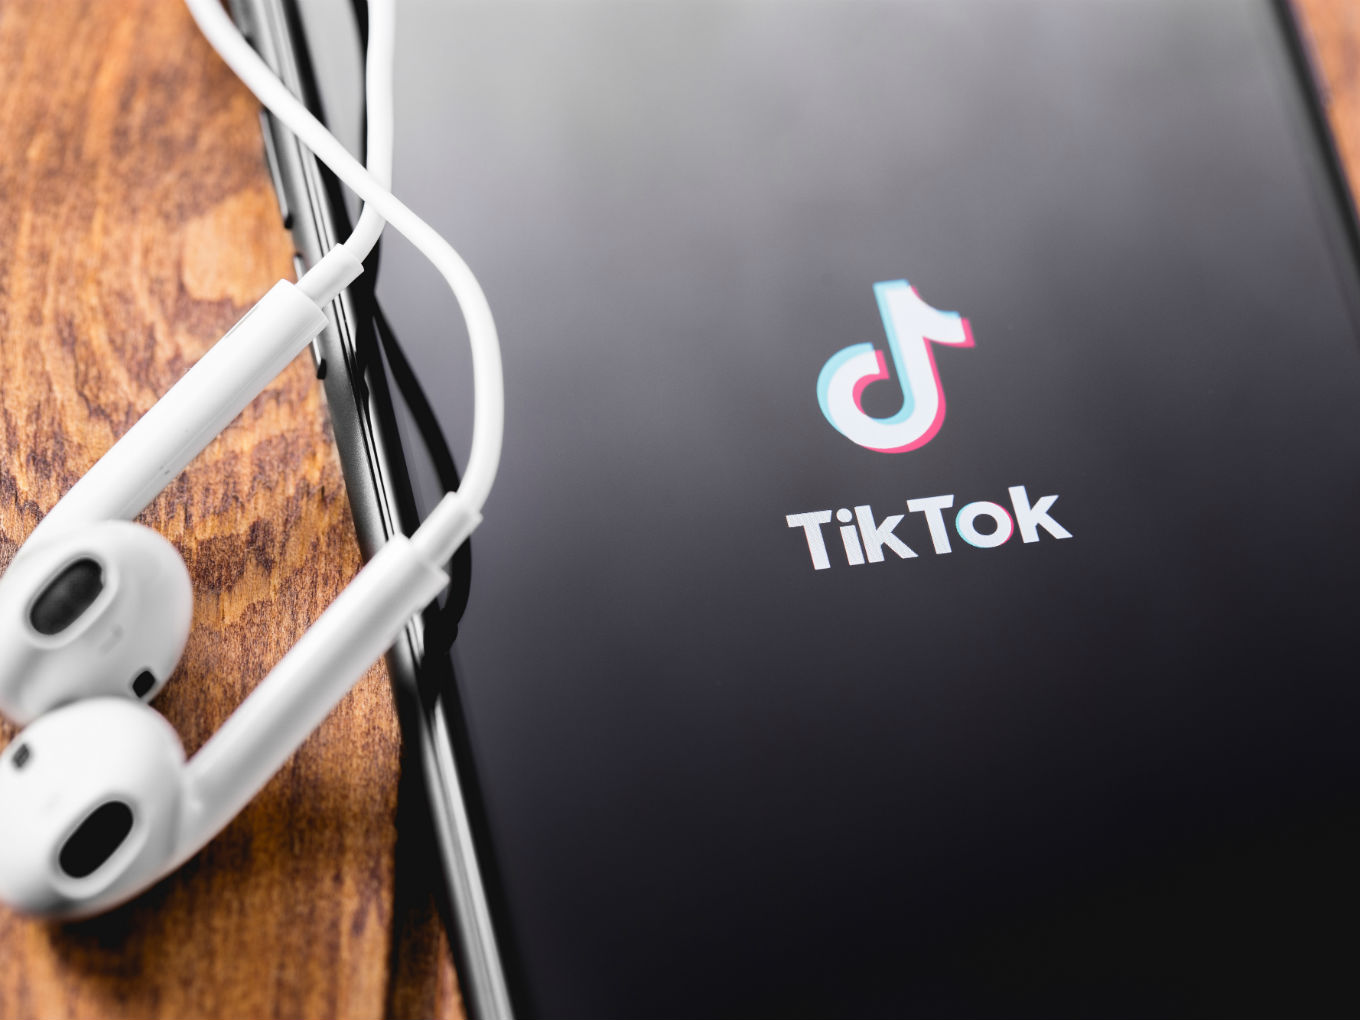 Govt Threatens TikTok, Helo With Ban, Questions “Anti-National” Activities